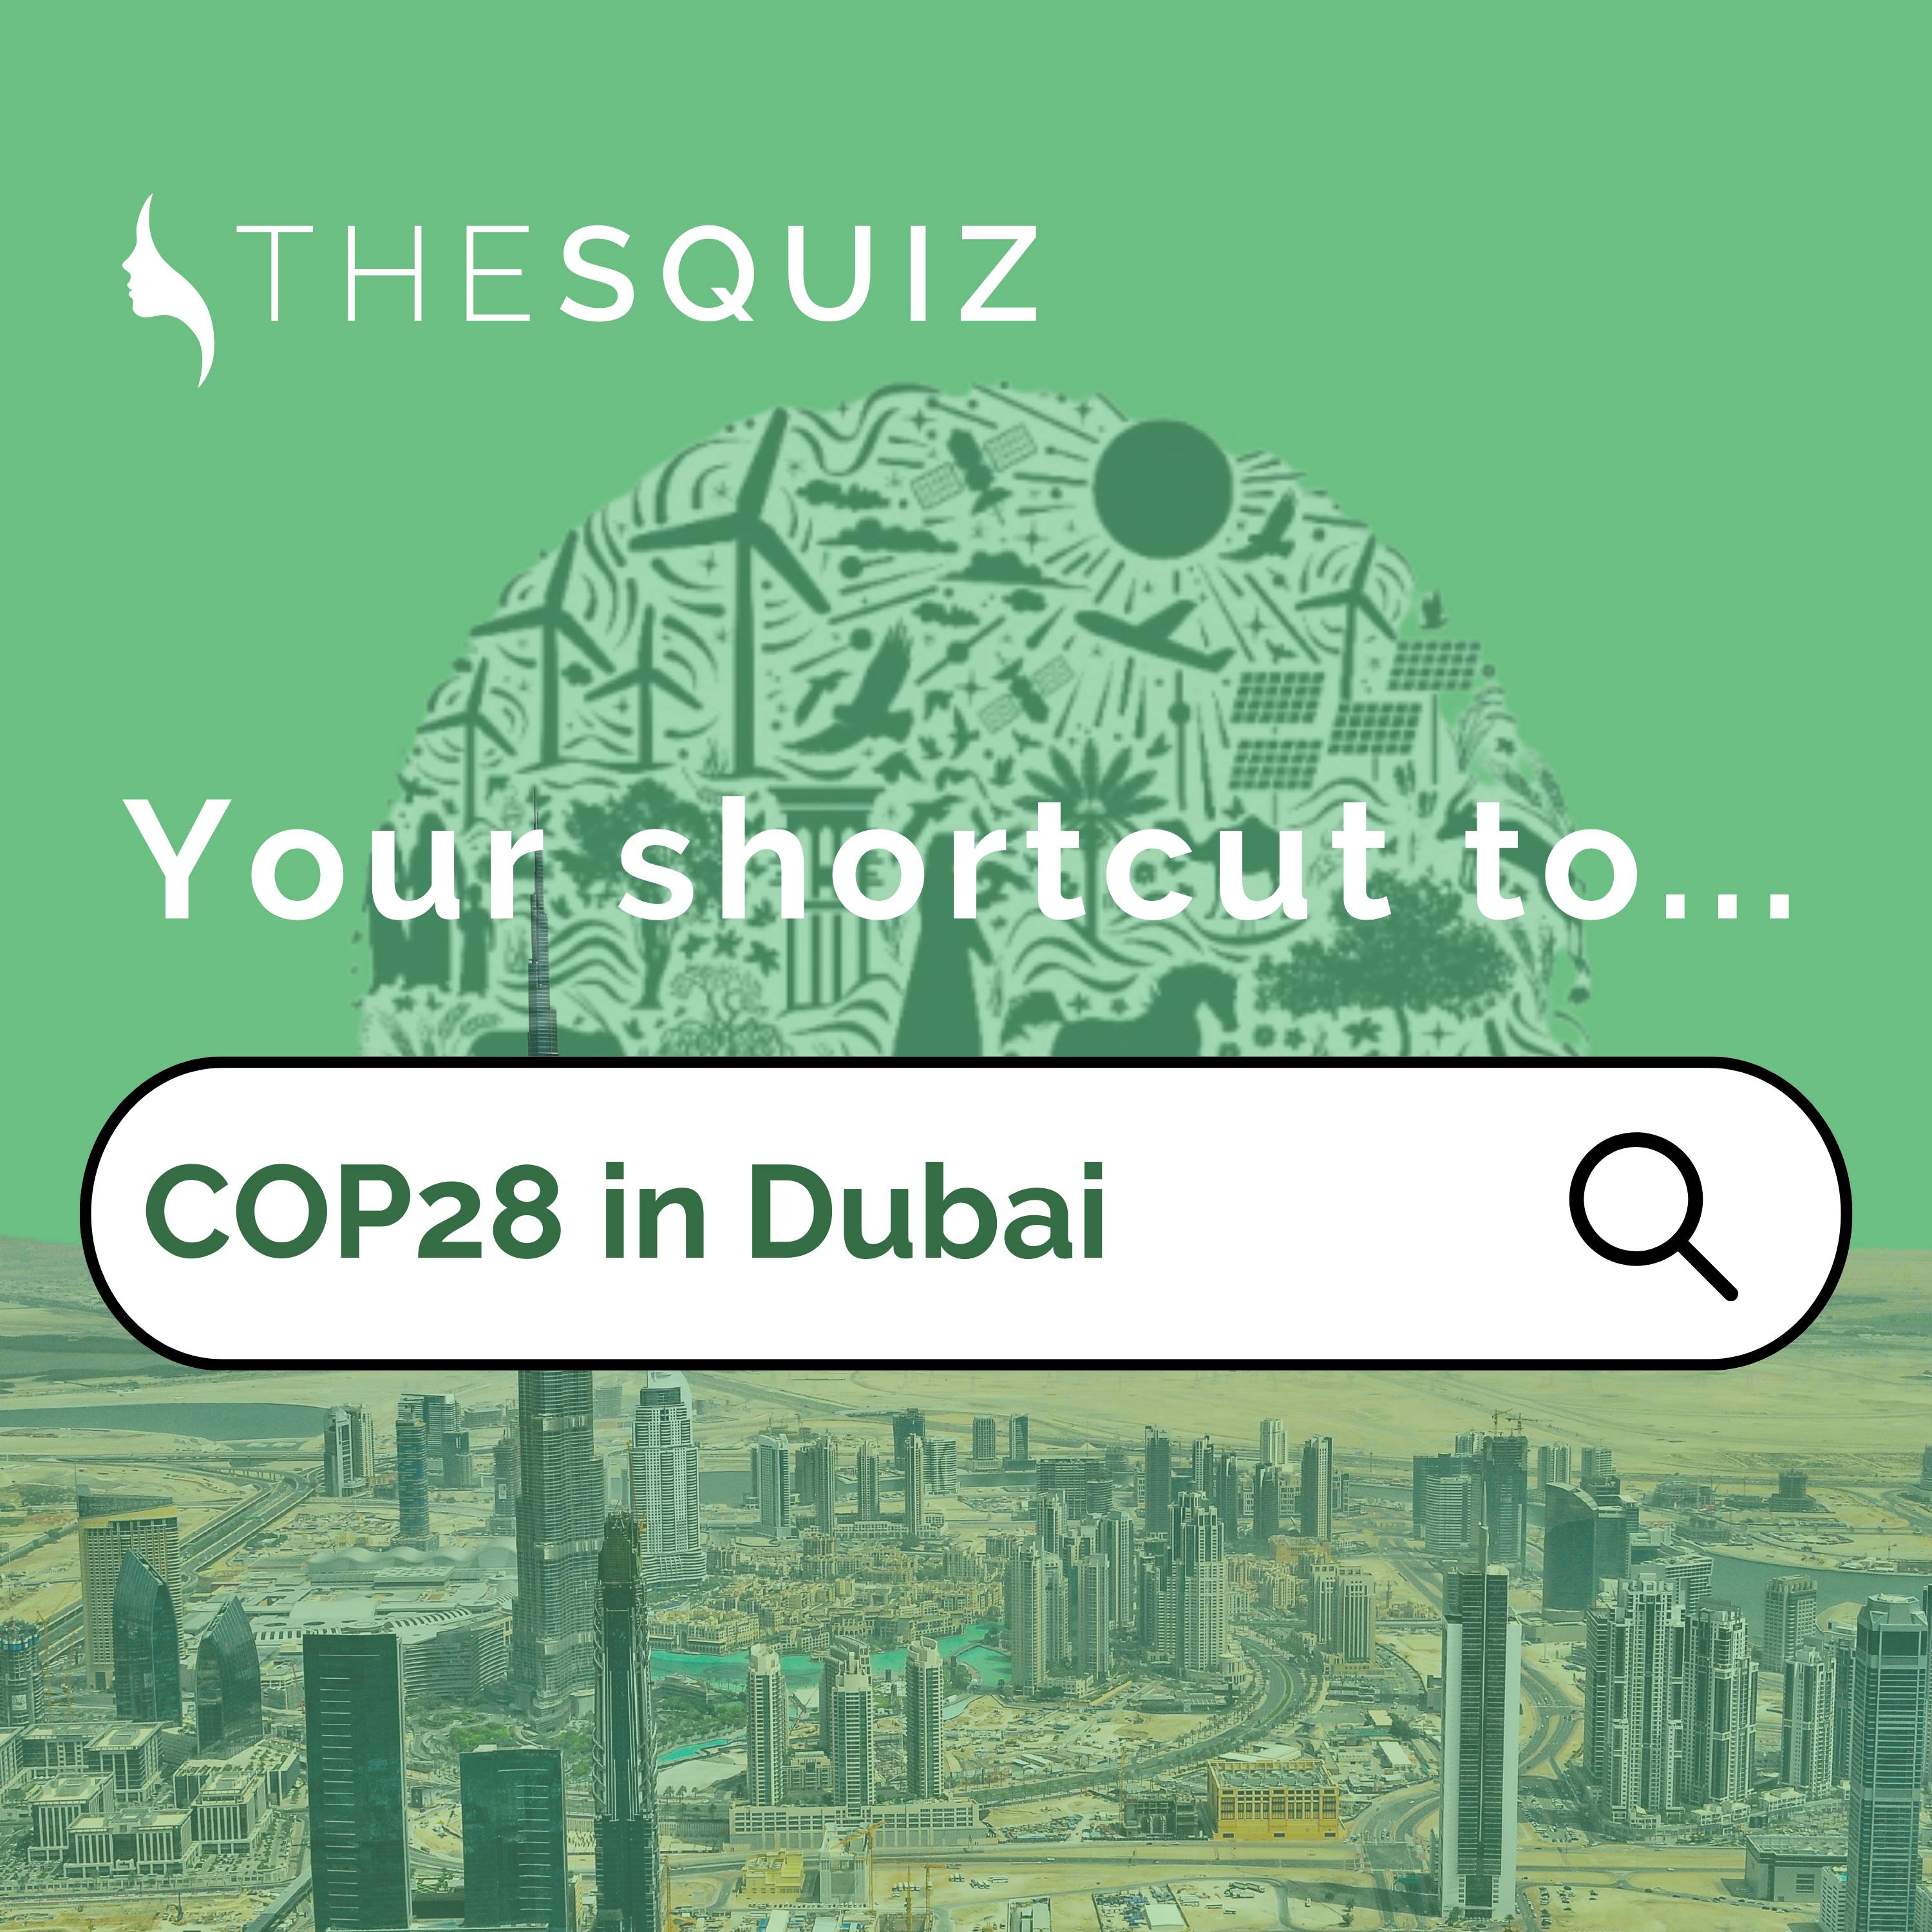 Your Shortcut to... what's going down at COP28